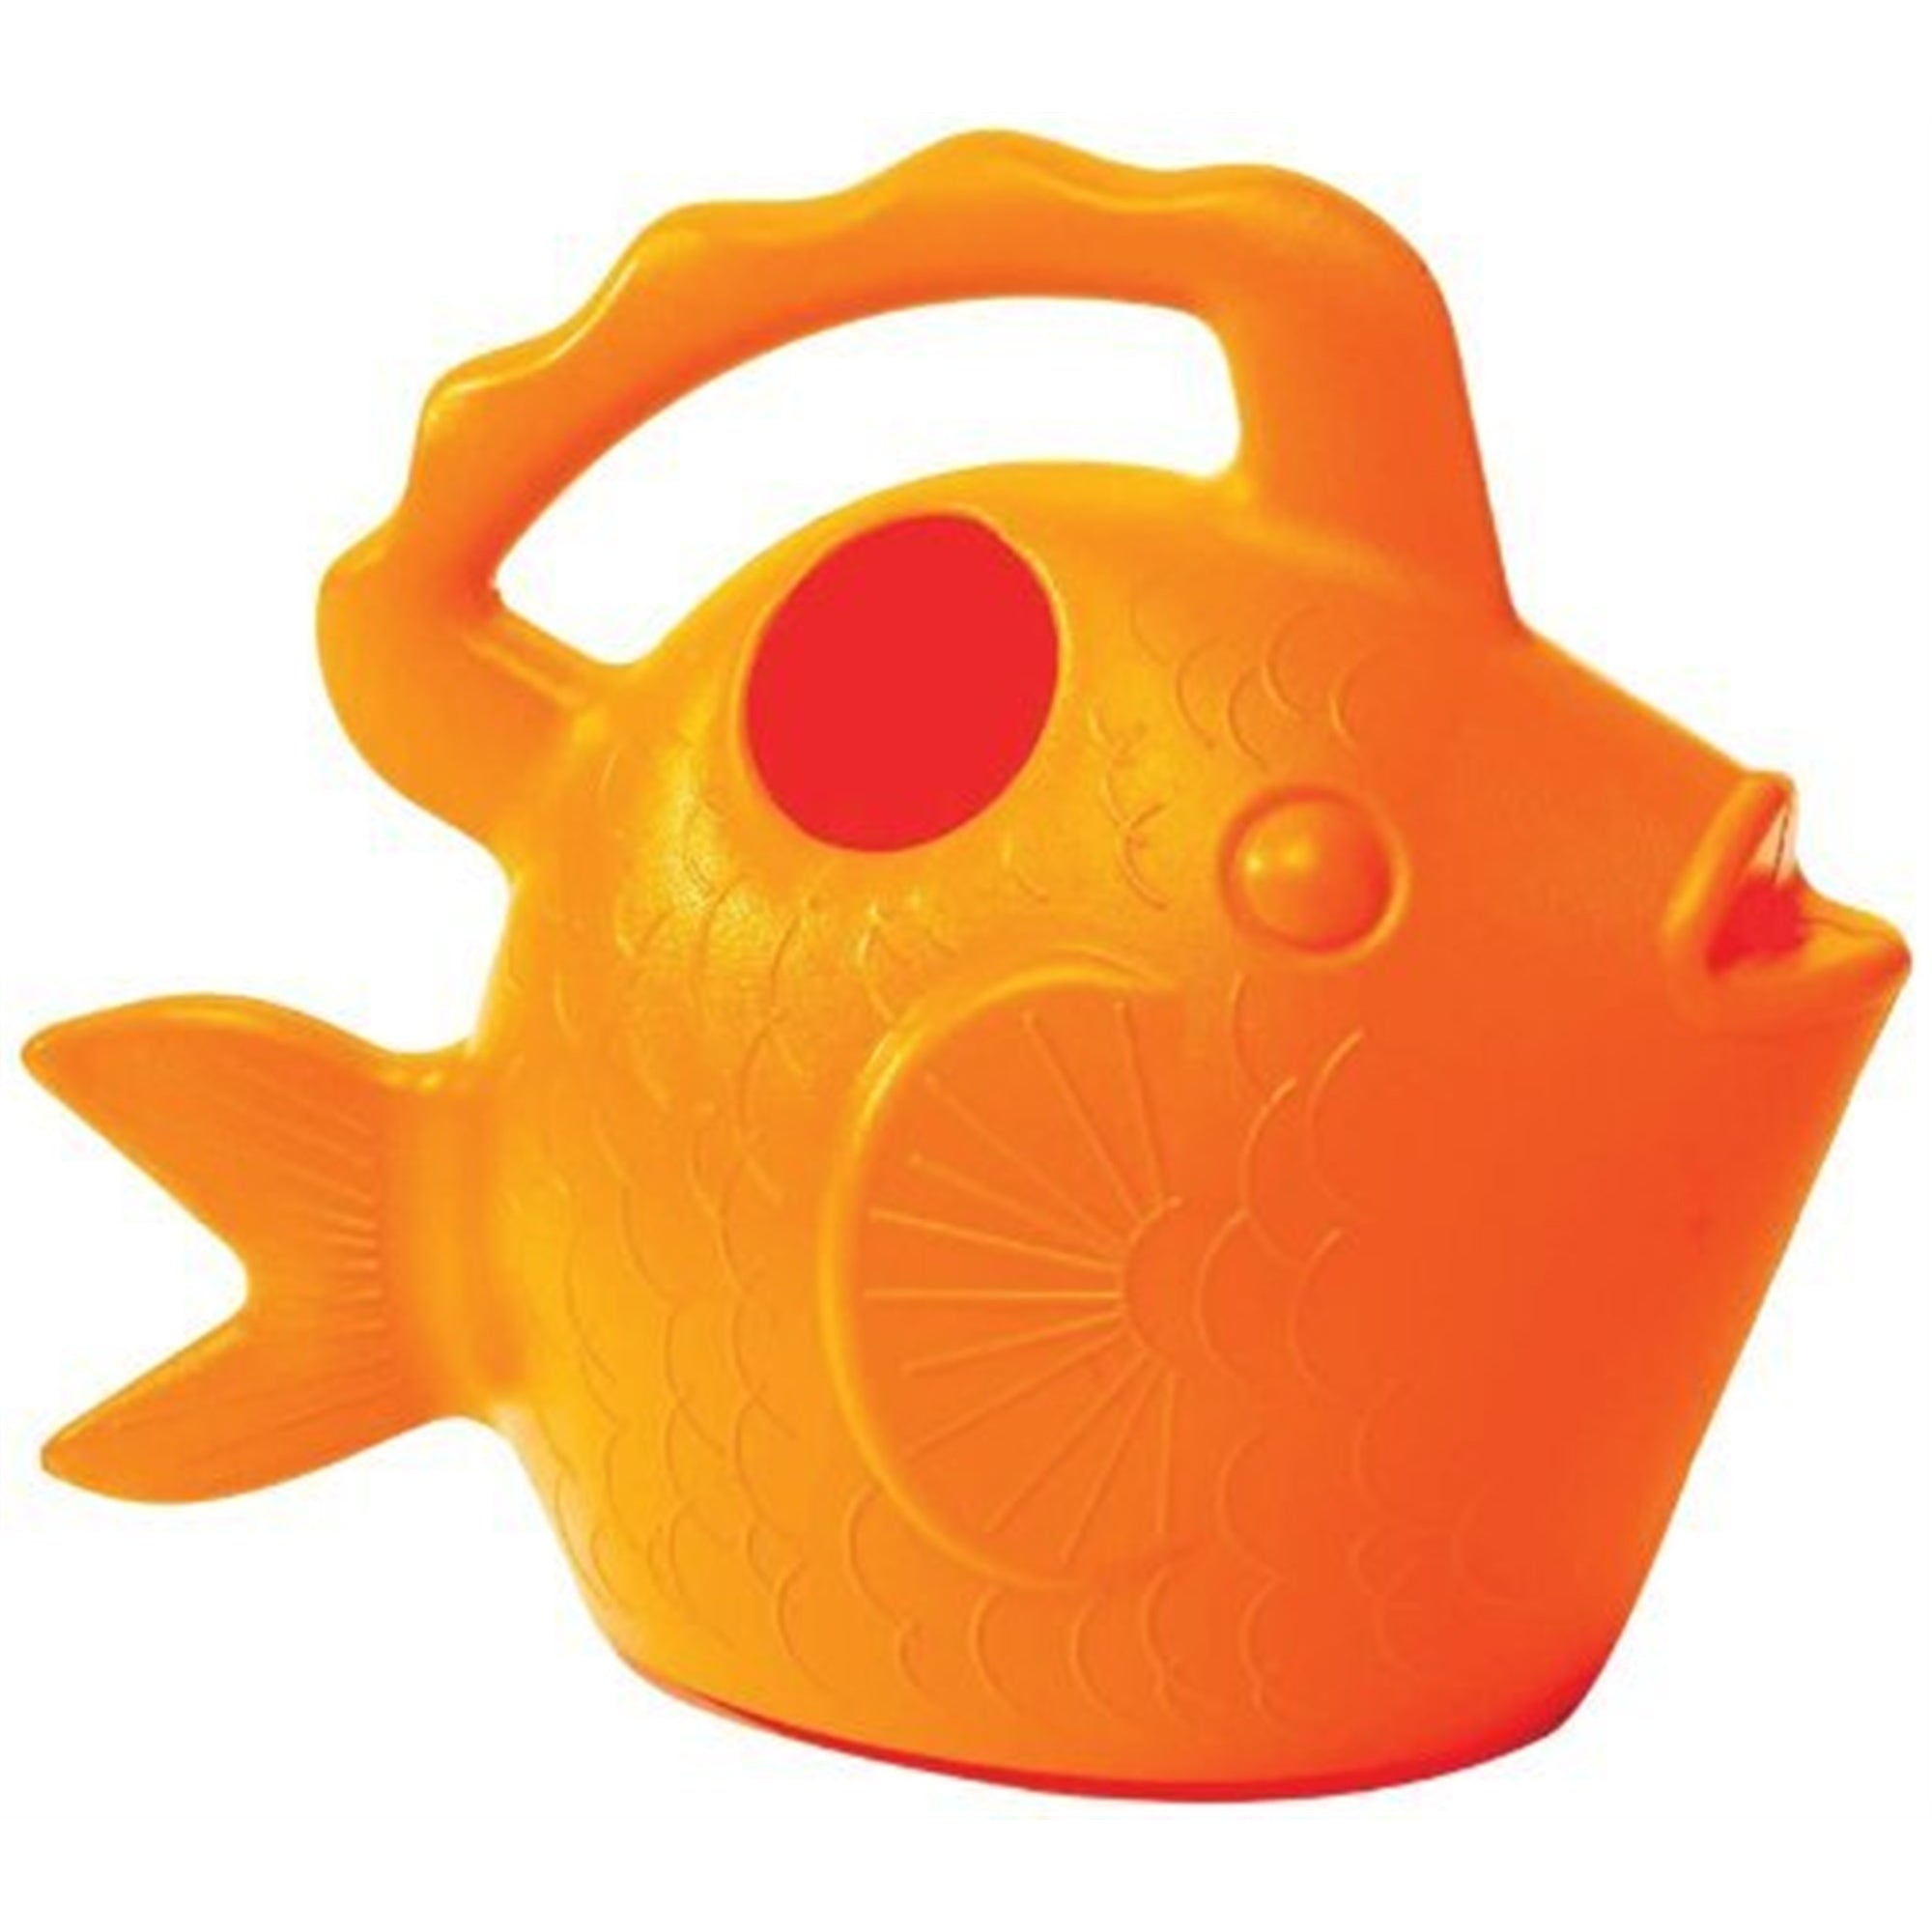 Novelty Squirt Fish Kids Watering Can, Orange, 0.75 Gallon